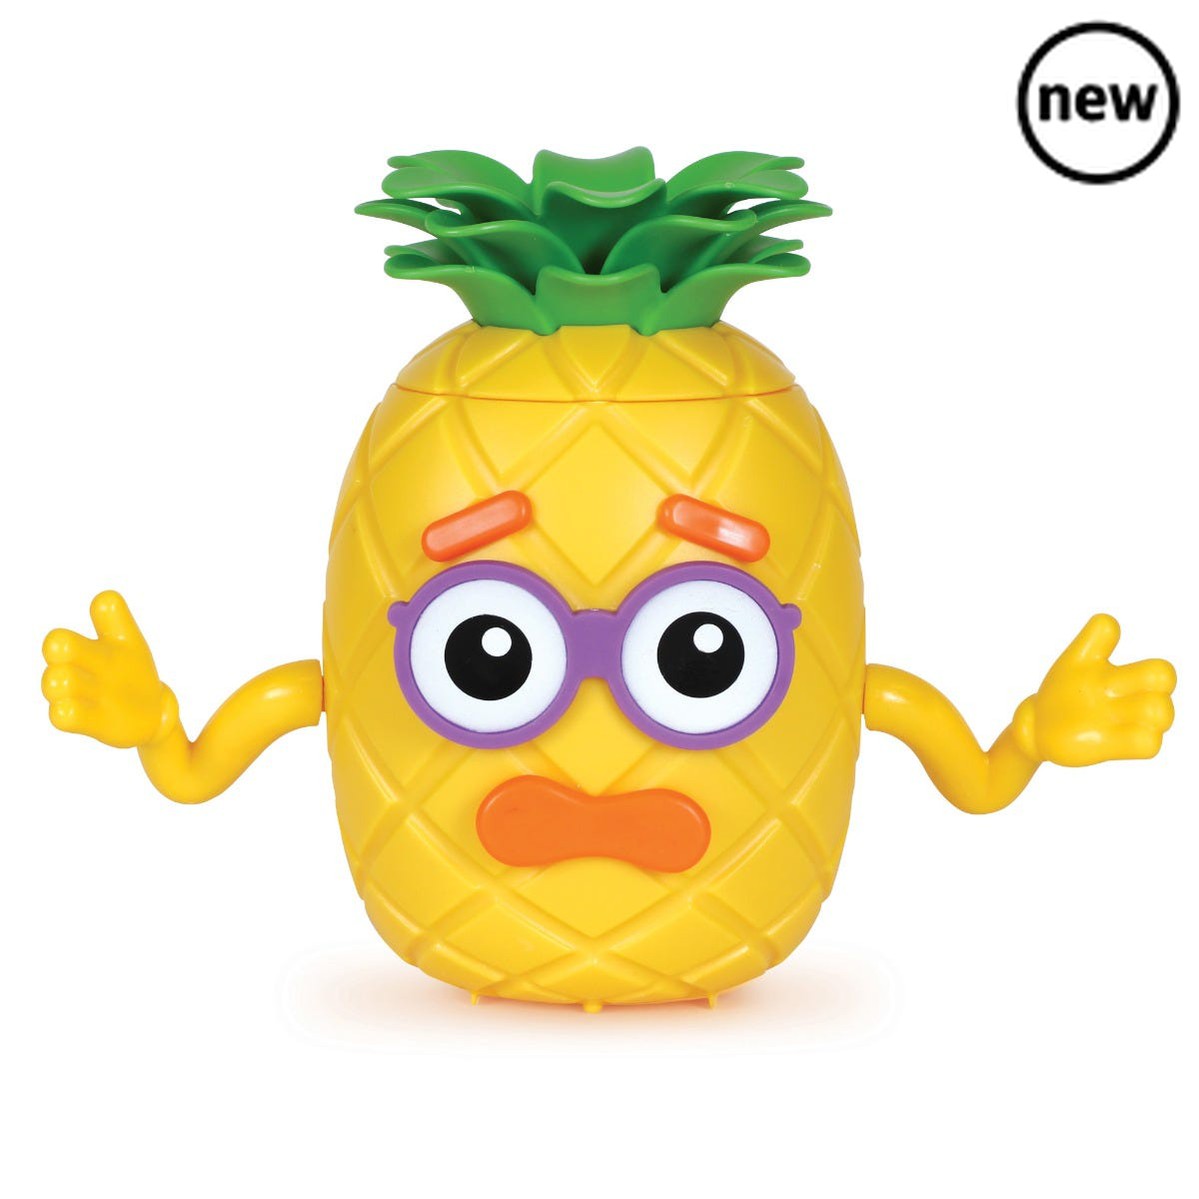 Big Feelings Pineapple Deluxe Set, Introducing the Big Feelings Pineapple Deluxe Set, an expanded version of our multi-award-winning Big Feelings Pineapple™. Dive into a world of emotions and self-discovery with this engaging set that allows children to explore feelings through facial and body expressions.The Big Feelings Pineapple Deluxe Set features 40 larger face pieces and 3 pairs of arms, offering a wide range of emotions to be discovered. Whether it's a happy smile, a worried frown, or a confident sta